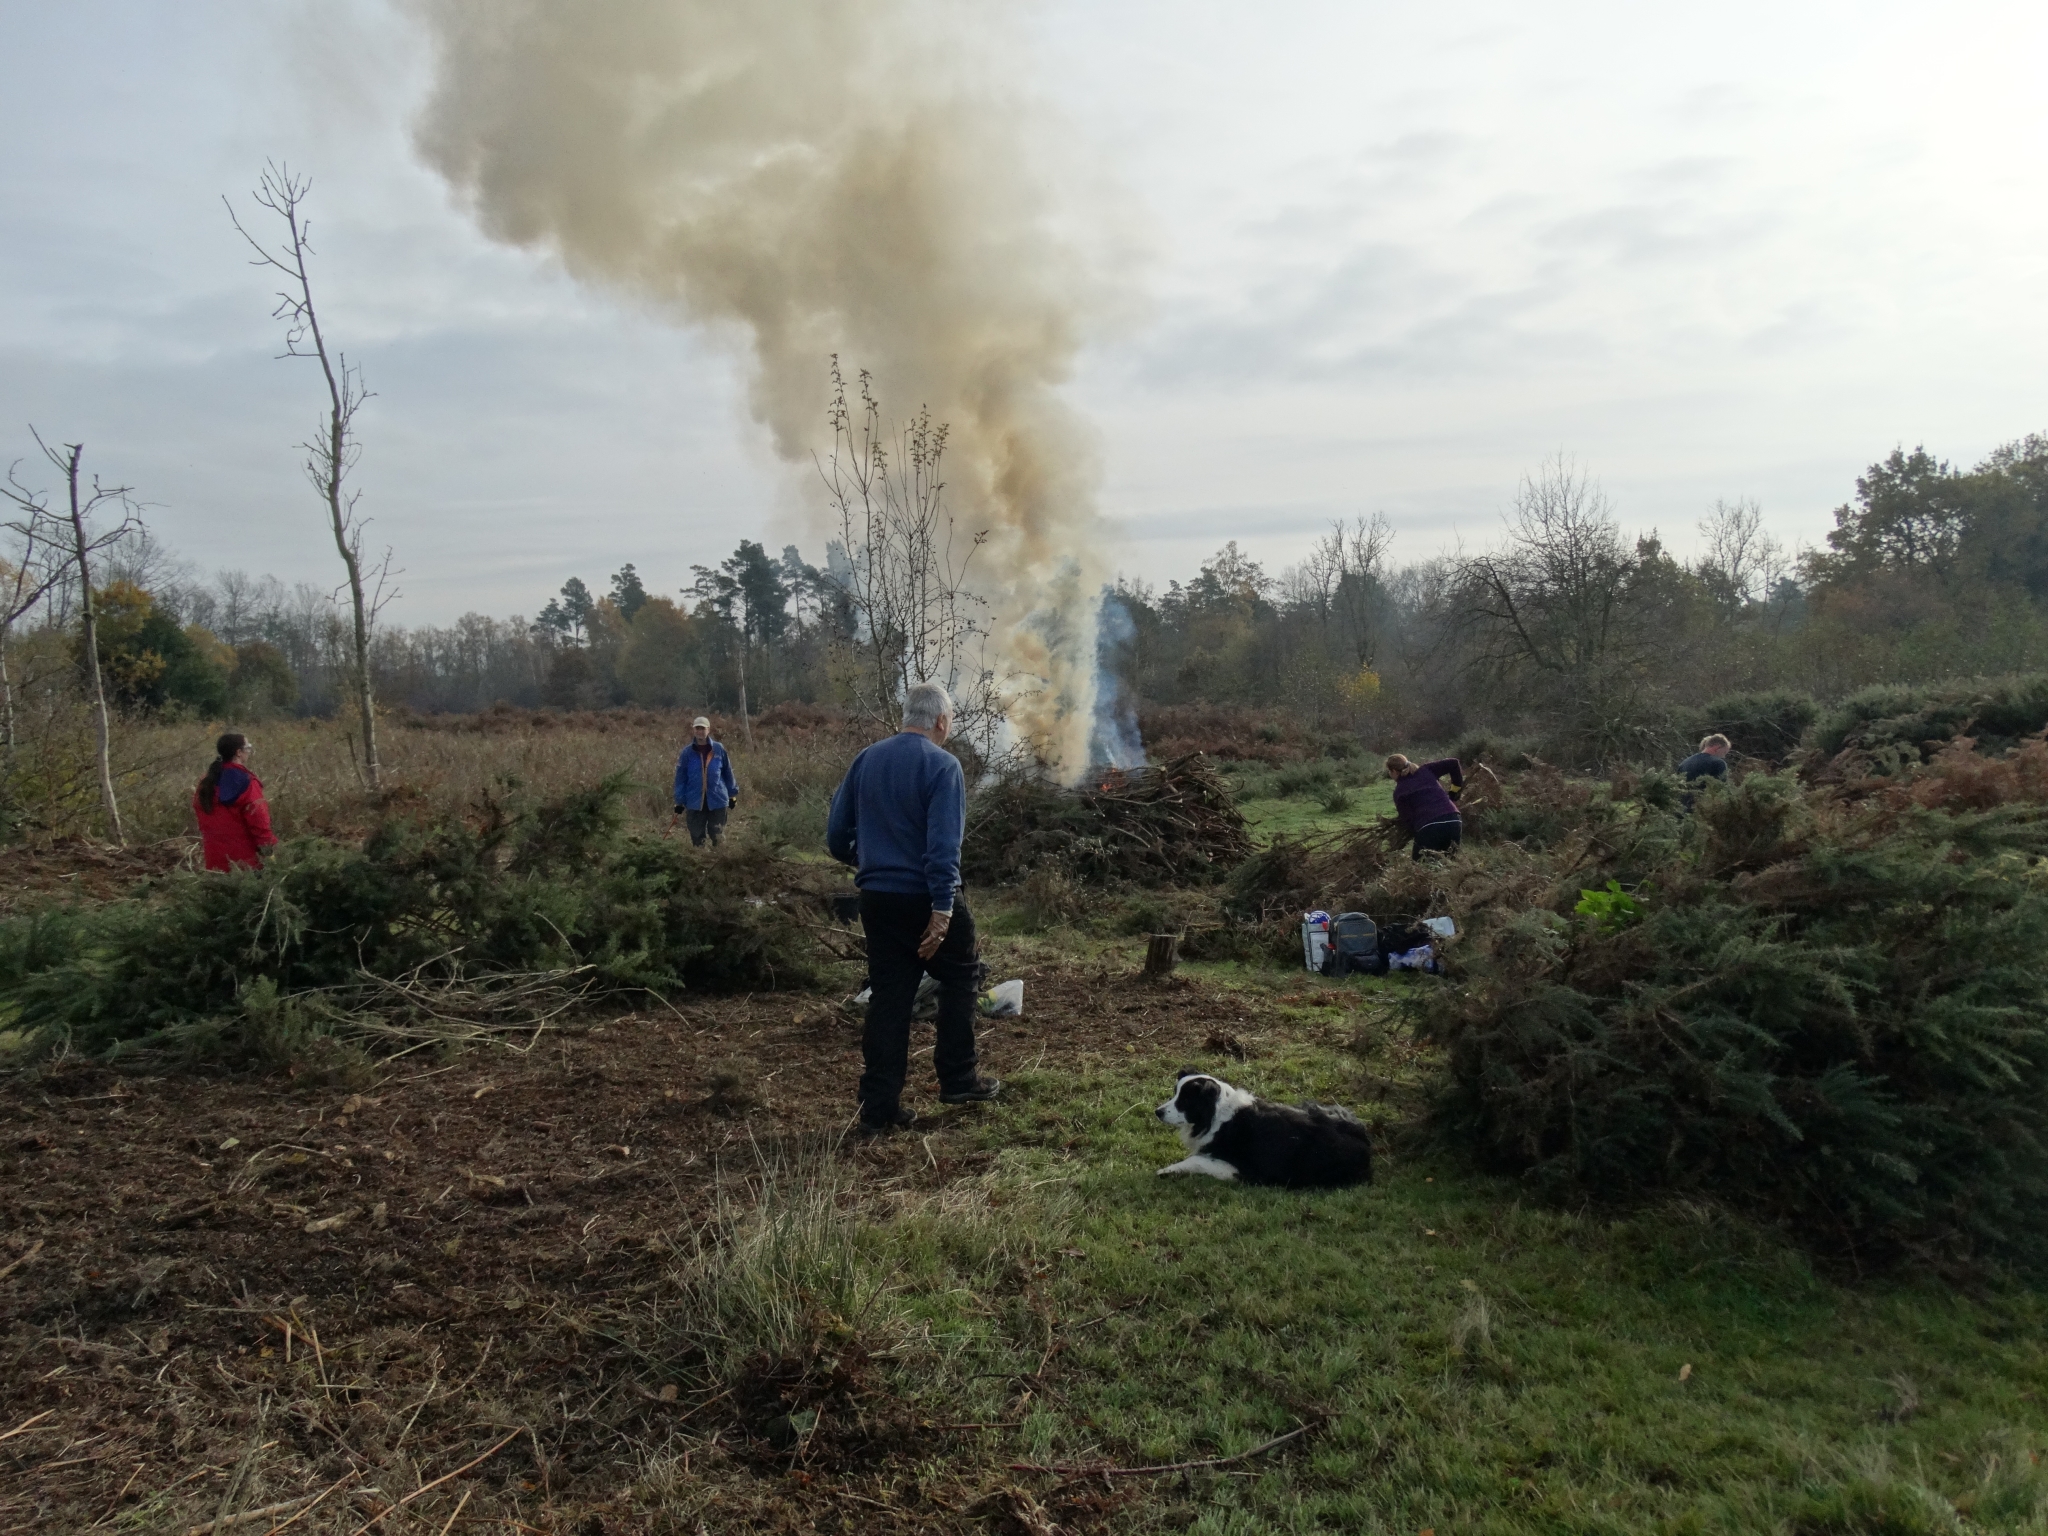 A photo from the FoTF Conservation Event - November 2019 - Gorse Clearance at Hockham Hills & Holes : Volunteer gather Gorse branches to place on the fire